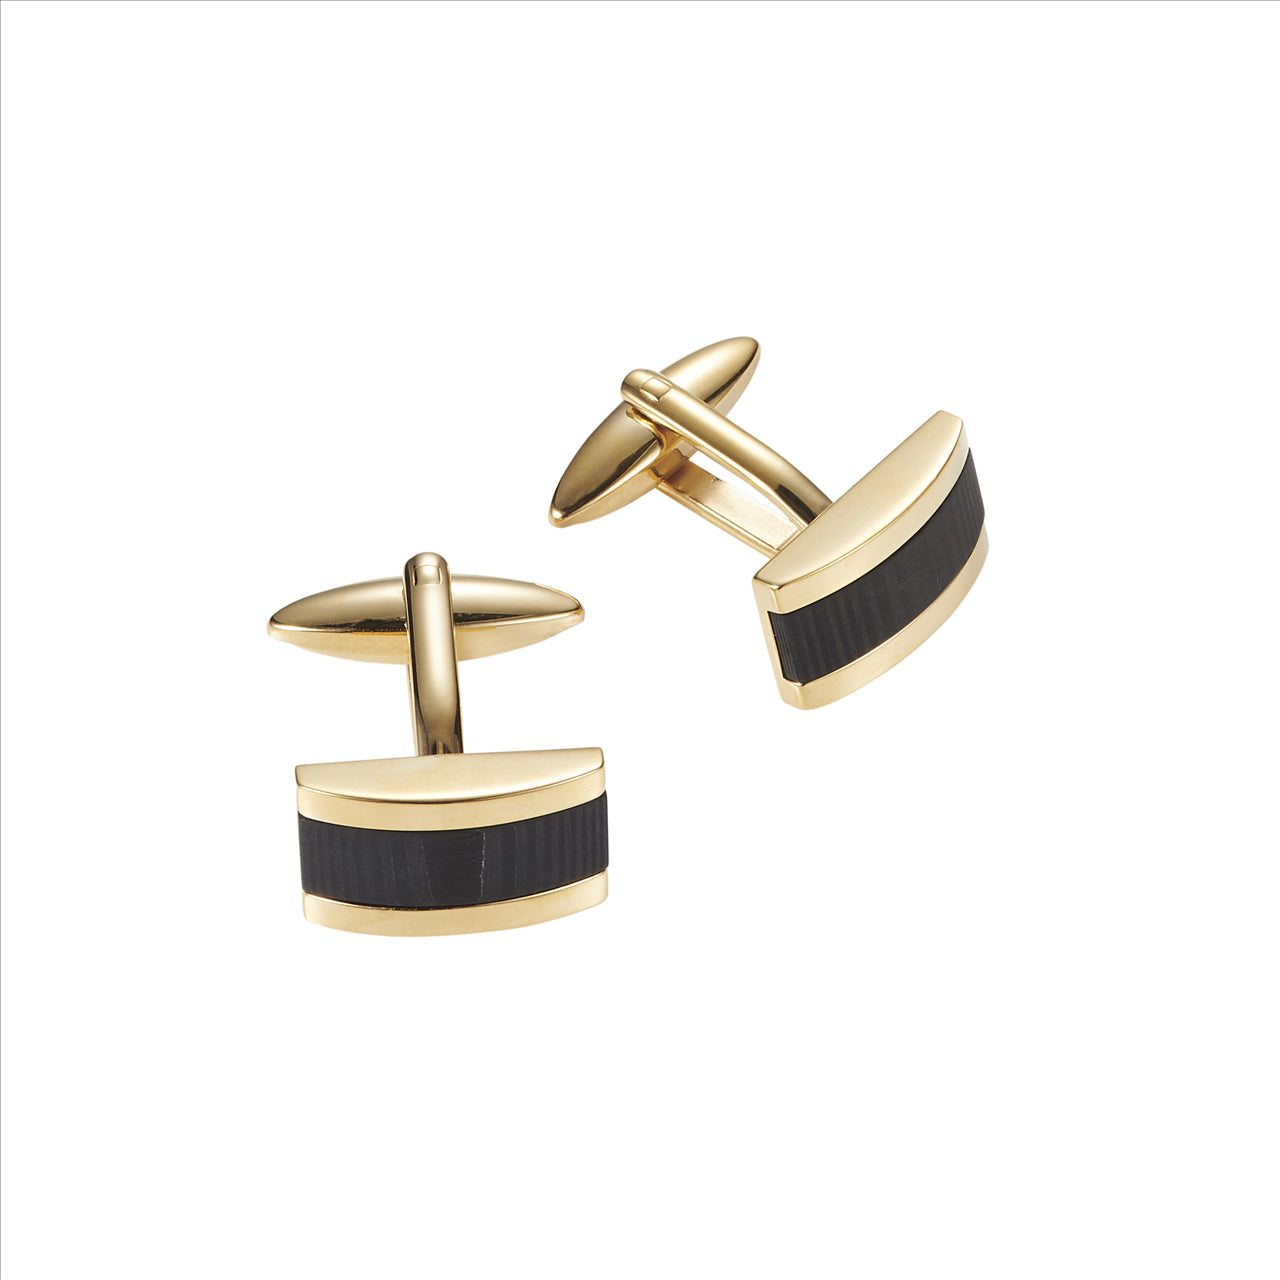 Stainless Steel/IP 14k Gold/Wood patterned Carbon Fibre Cufflinks